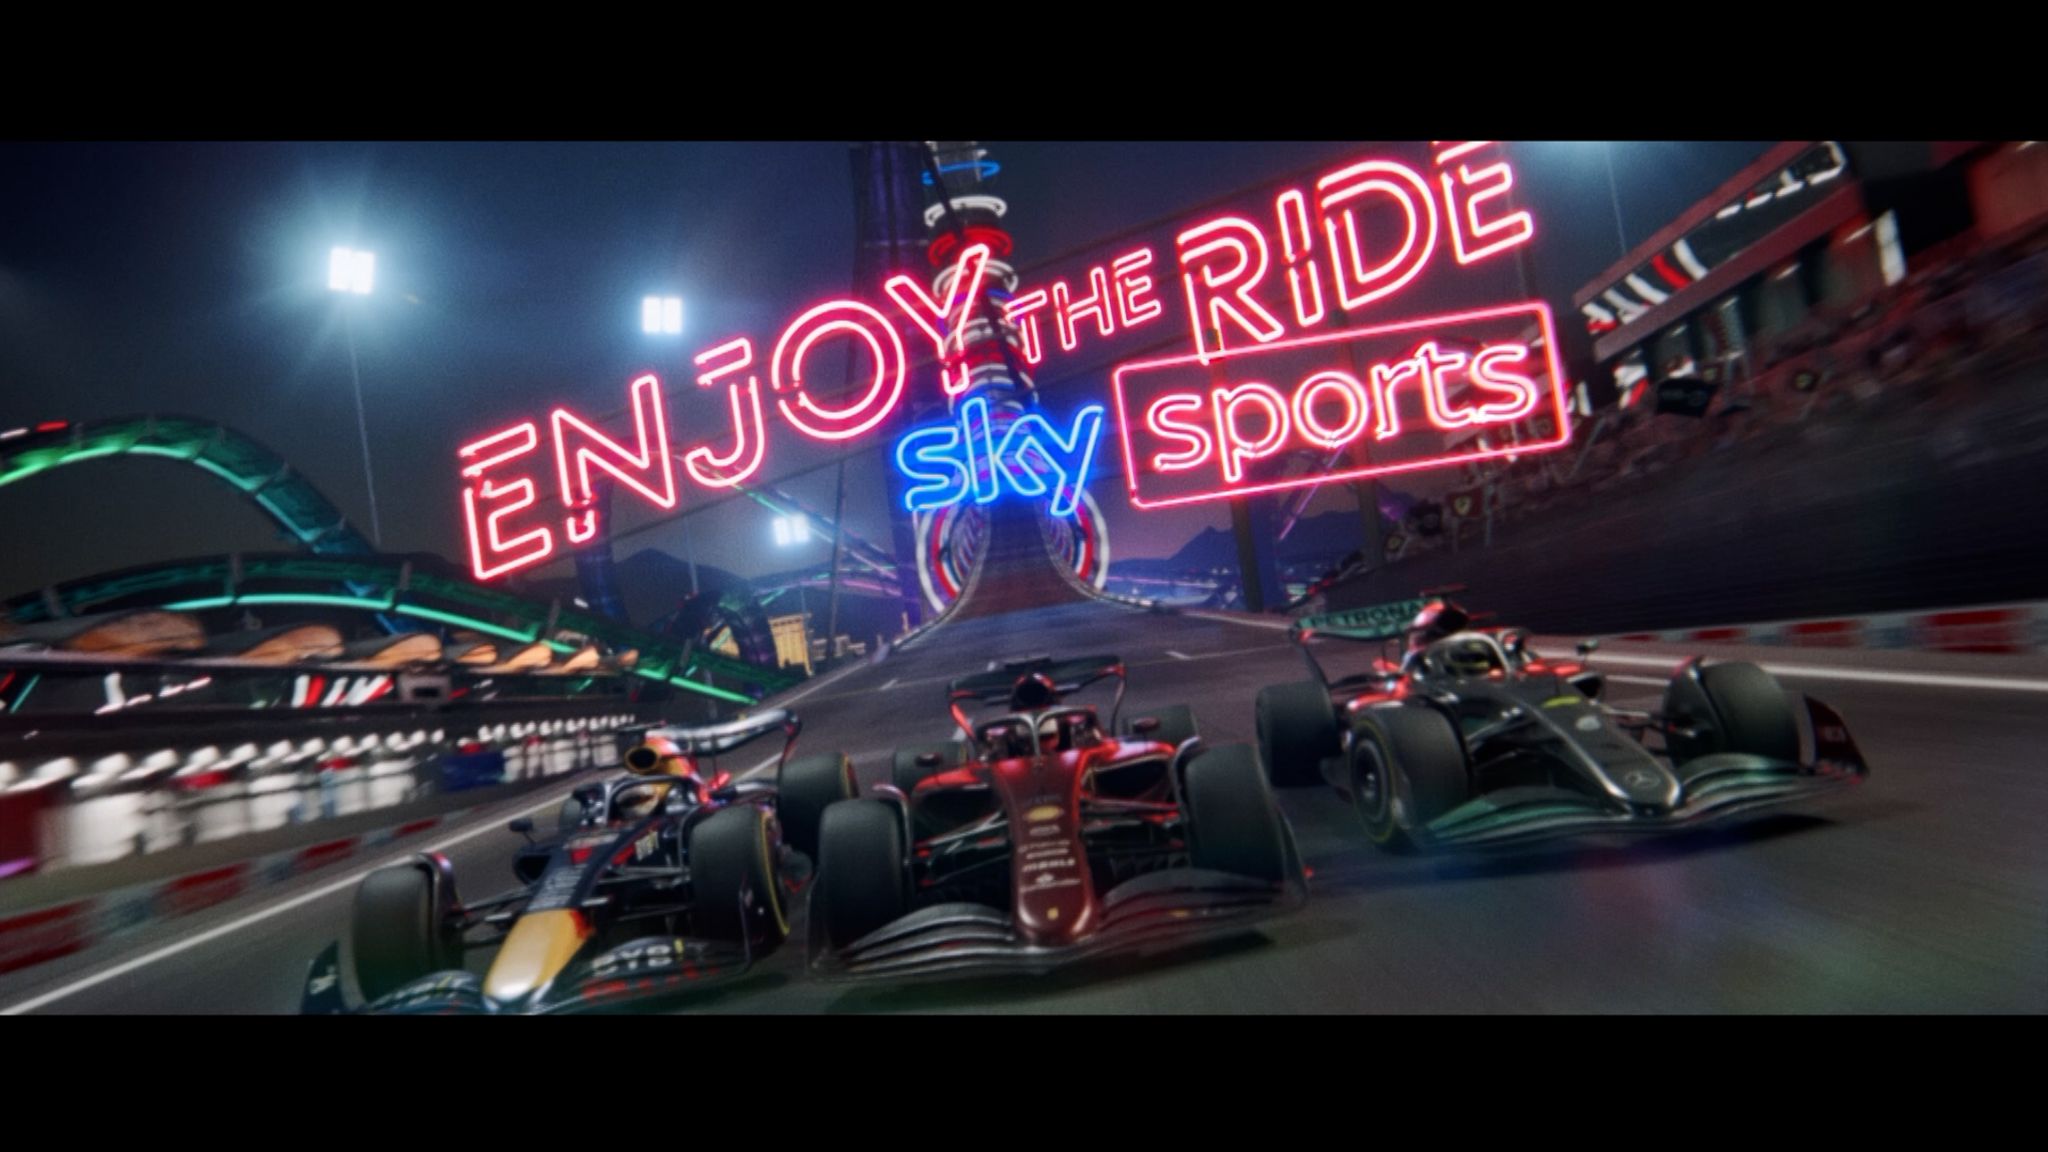 The twists and turns of F1 are back on Sky Sports! Video Watch TV Show Sky Sports